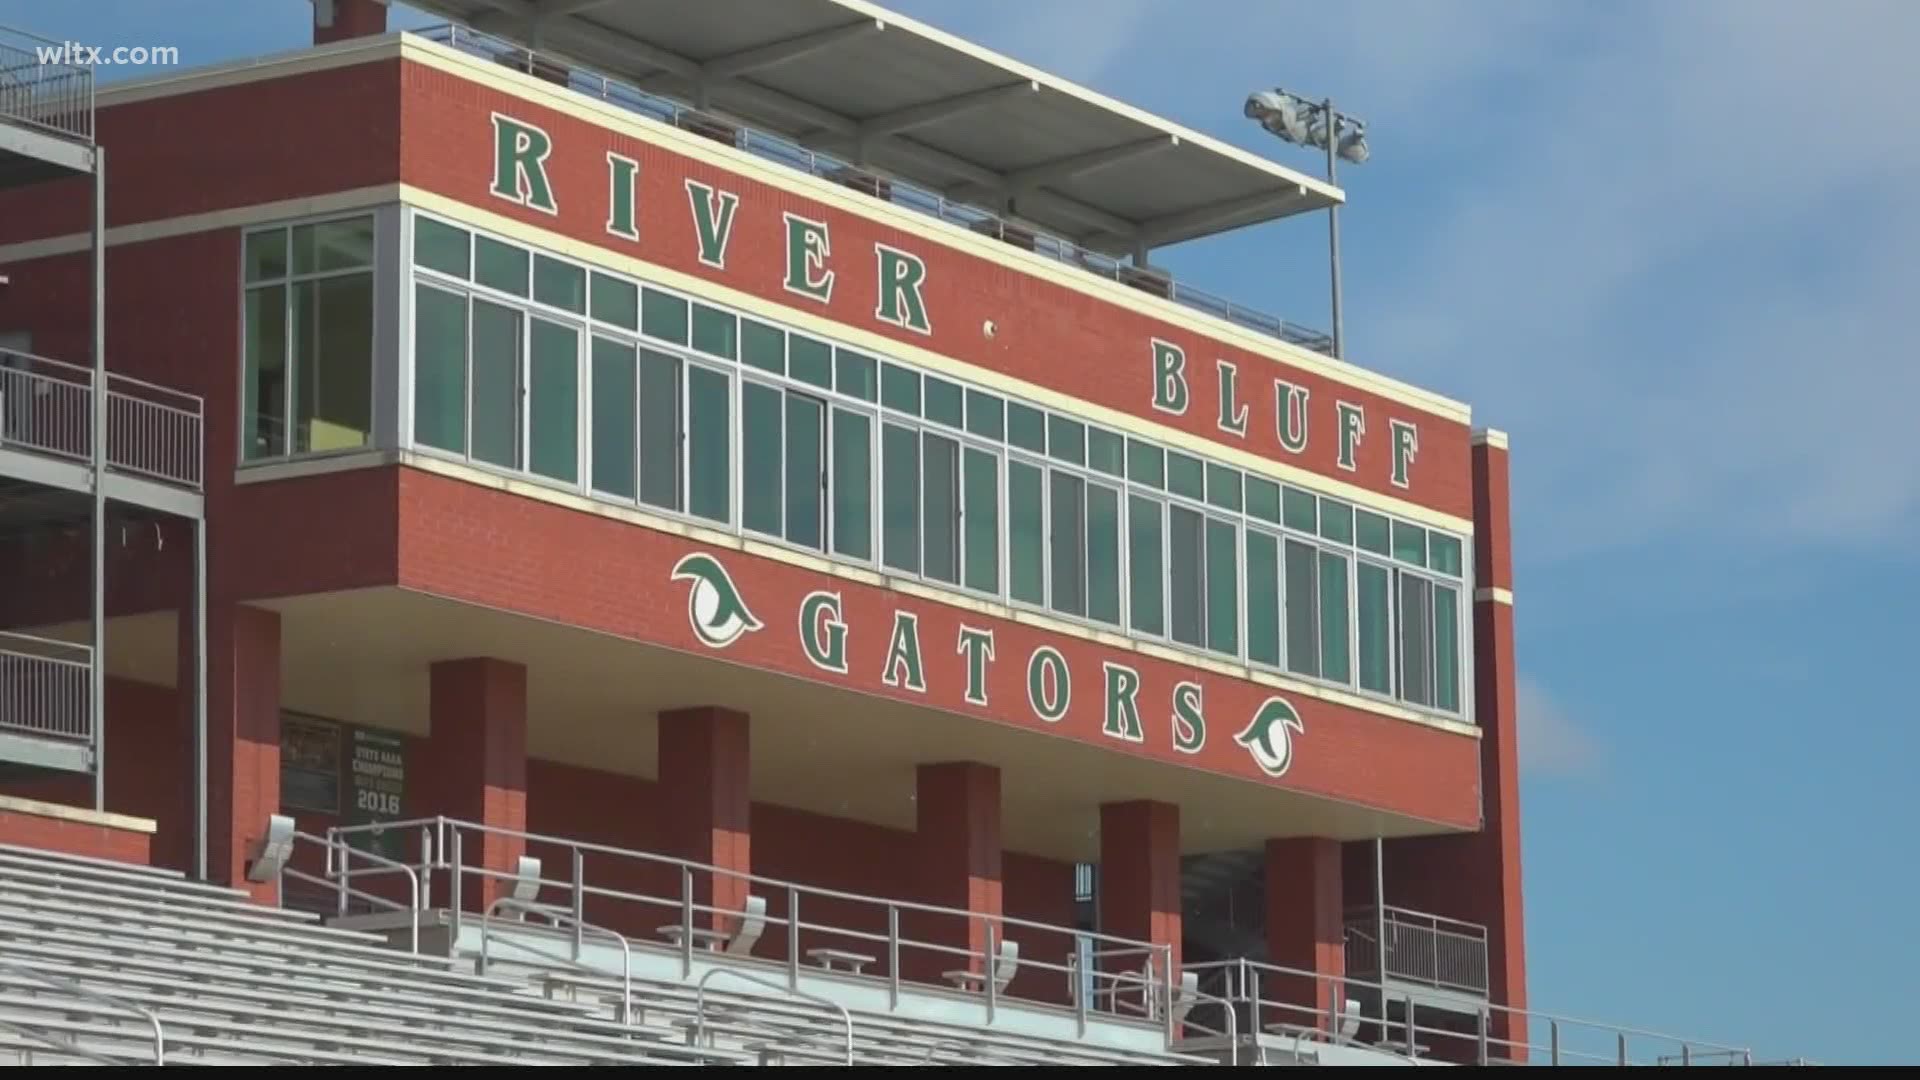 The River Bluff Gators delayed the start of their varsity football season because of positive COVID-19 tests.